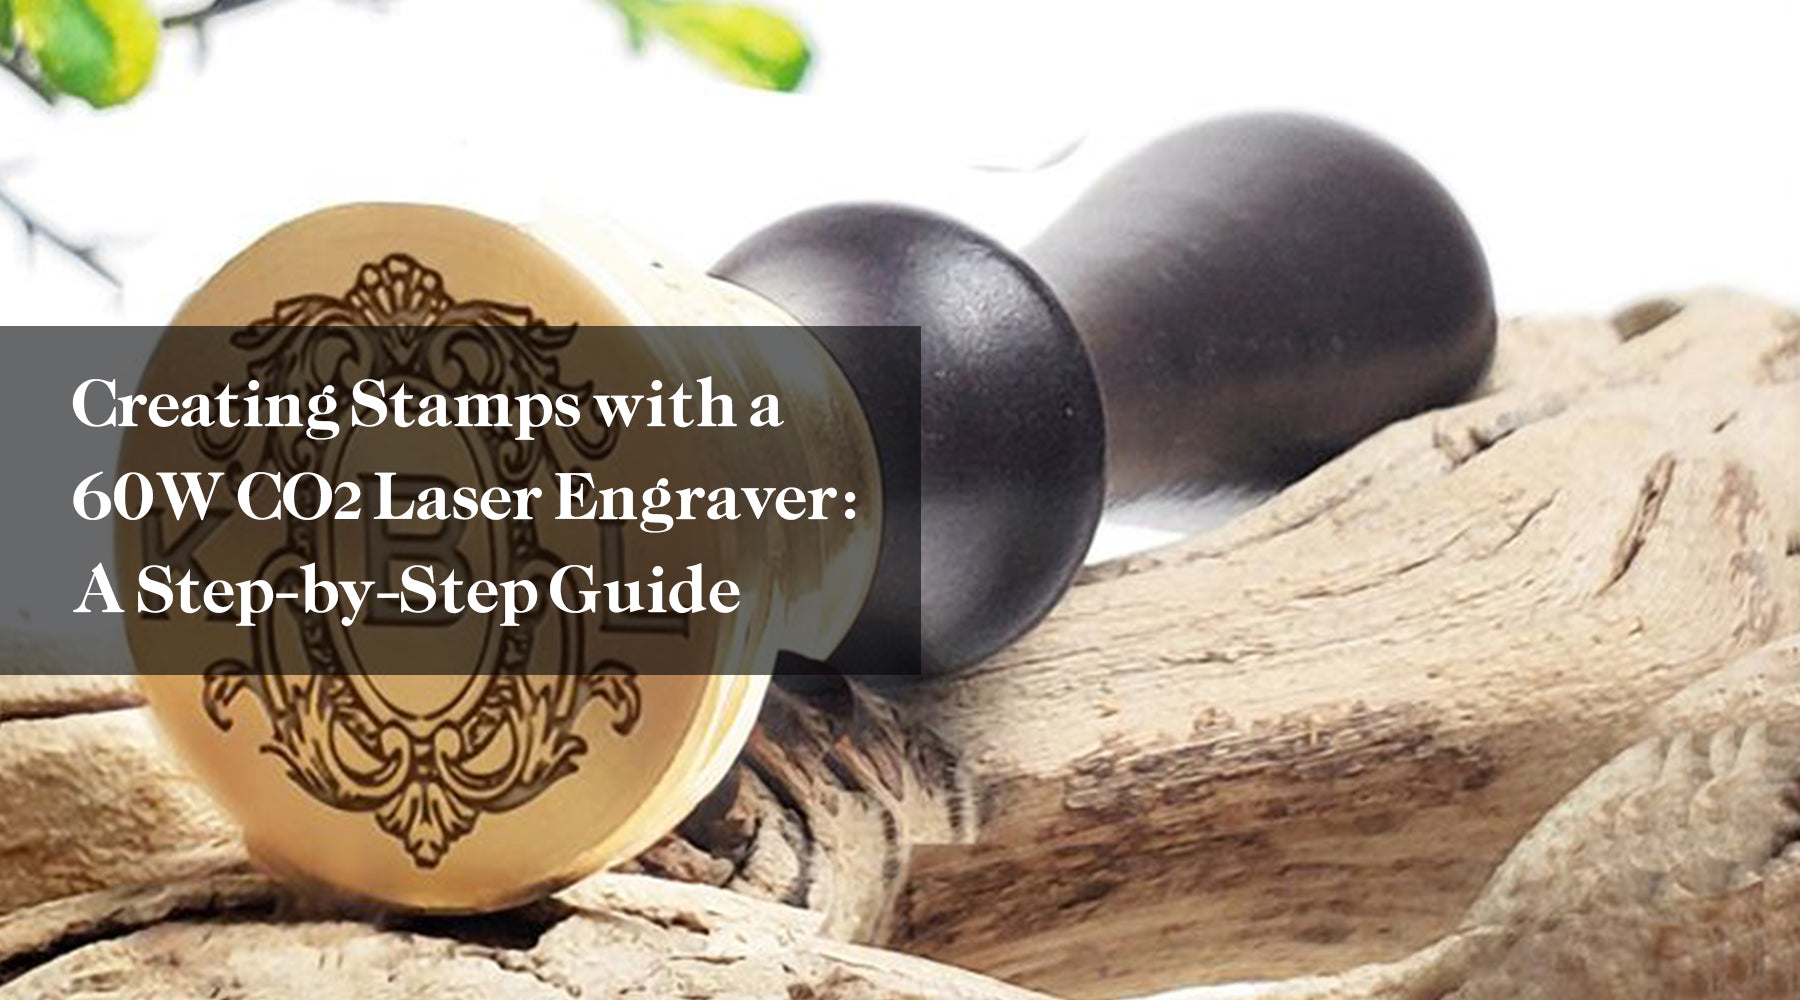 Creating Stamps with a 60W CO2 Laser Engraver: A Step-by-Step Guide